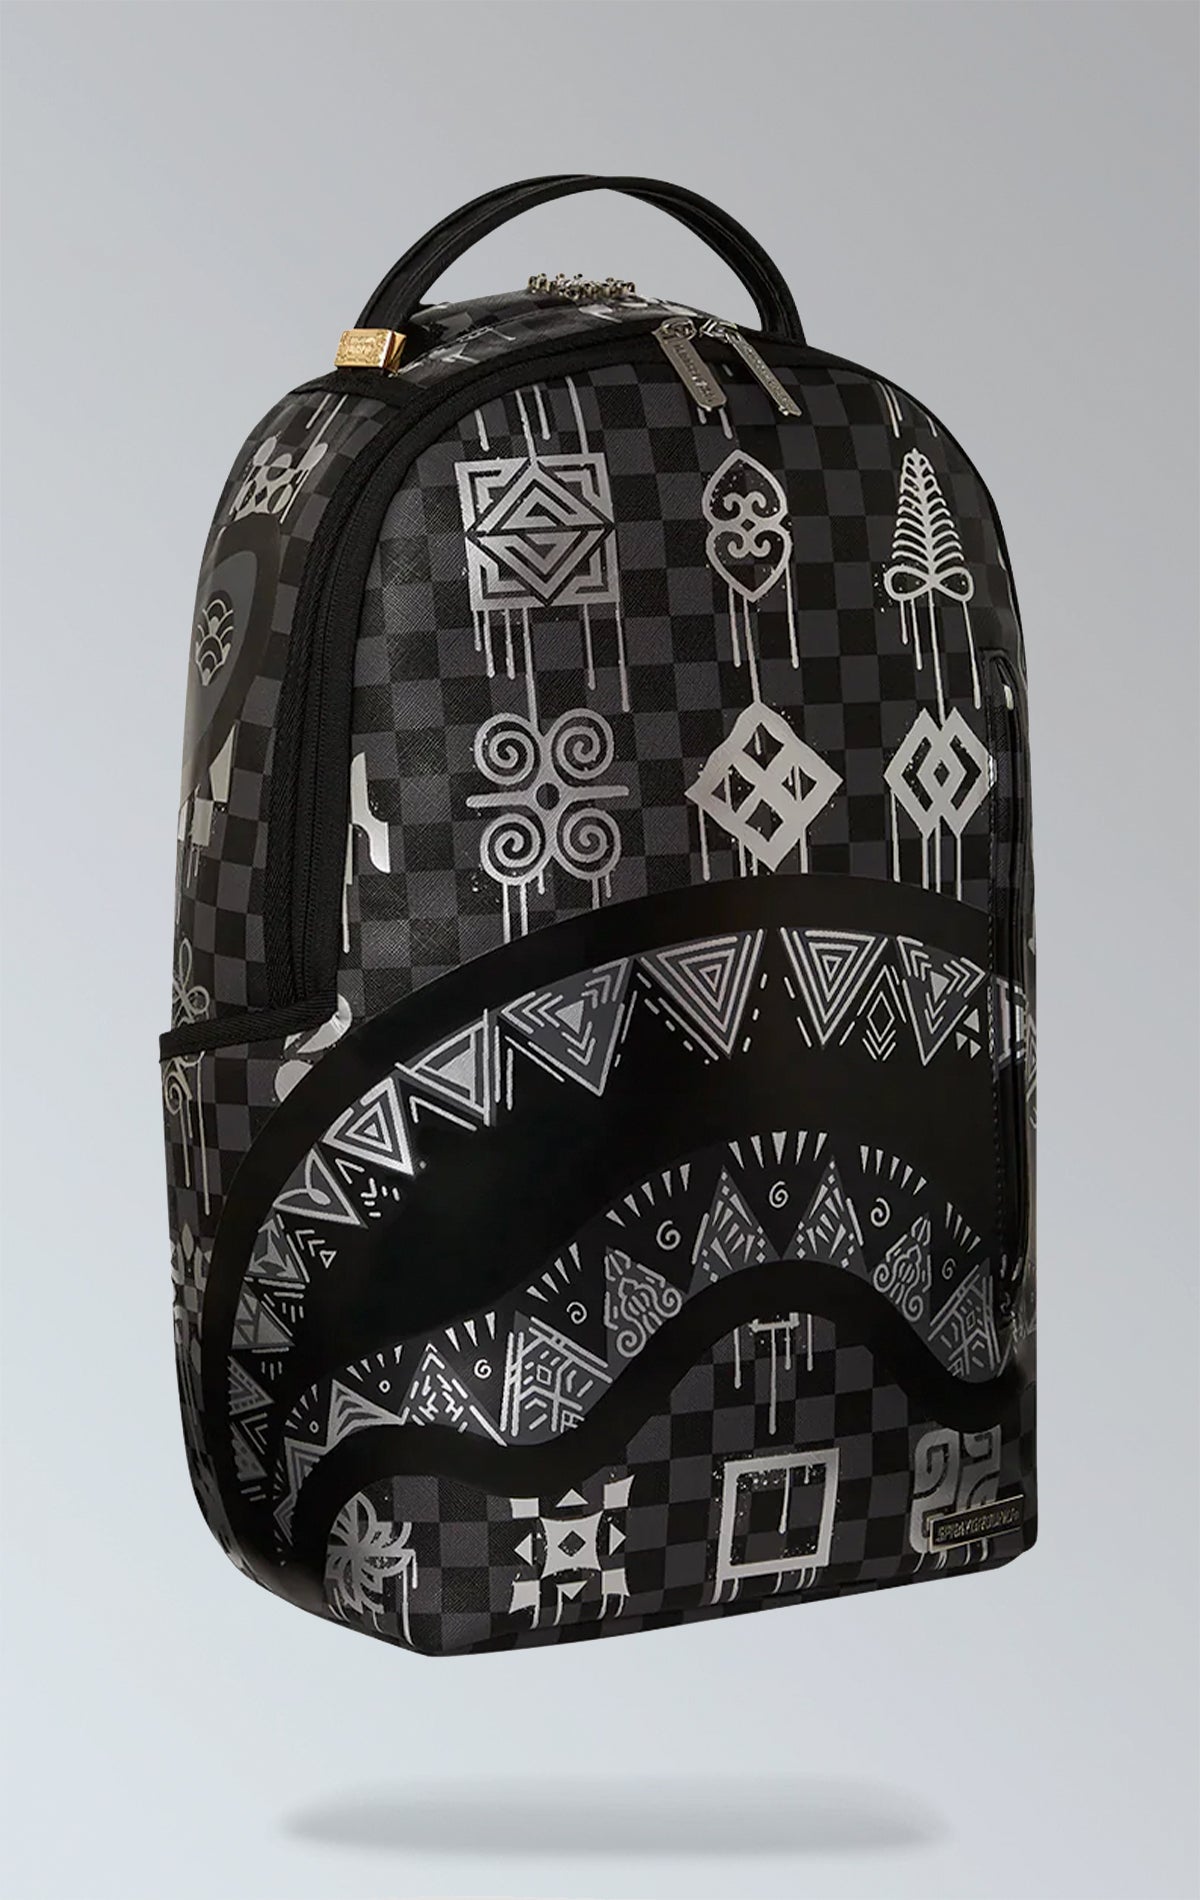 Black Sprayground backpack with eye-catching shark-glyphs graphic, featuring separate laptop & sunglasses compartments, padded back, and luggage sleeve.